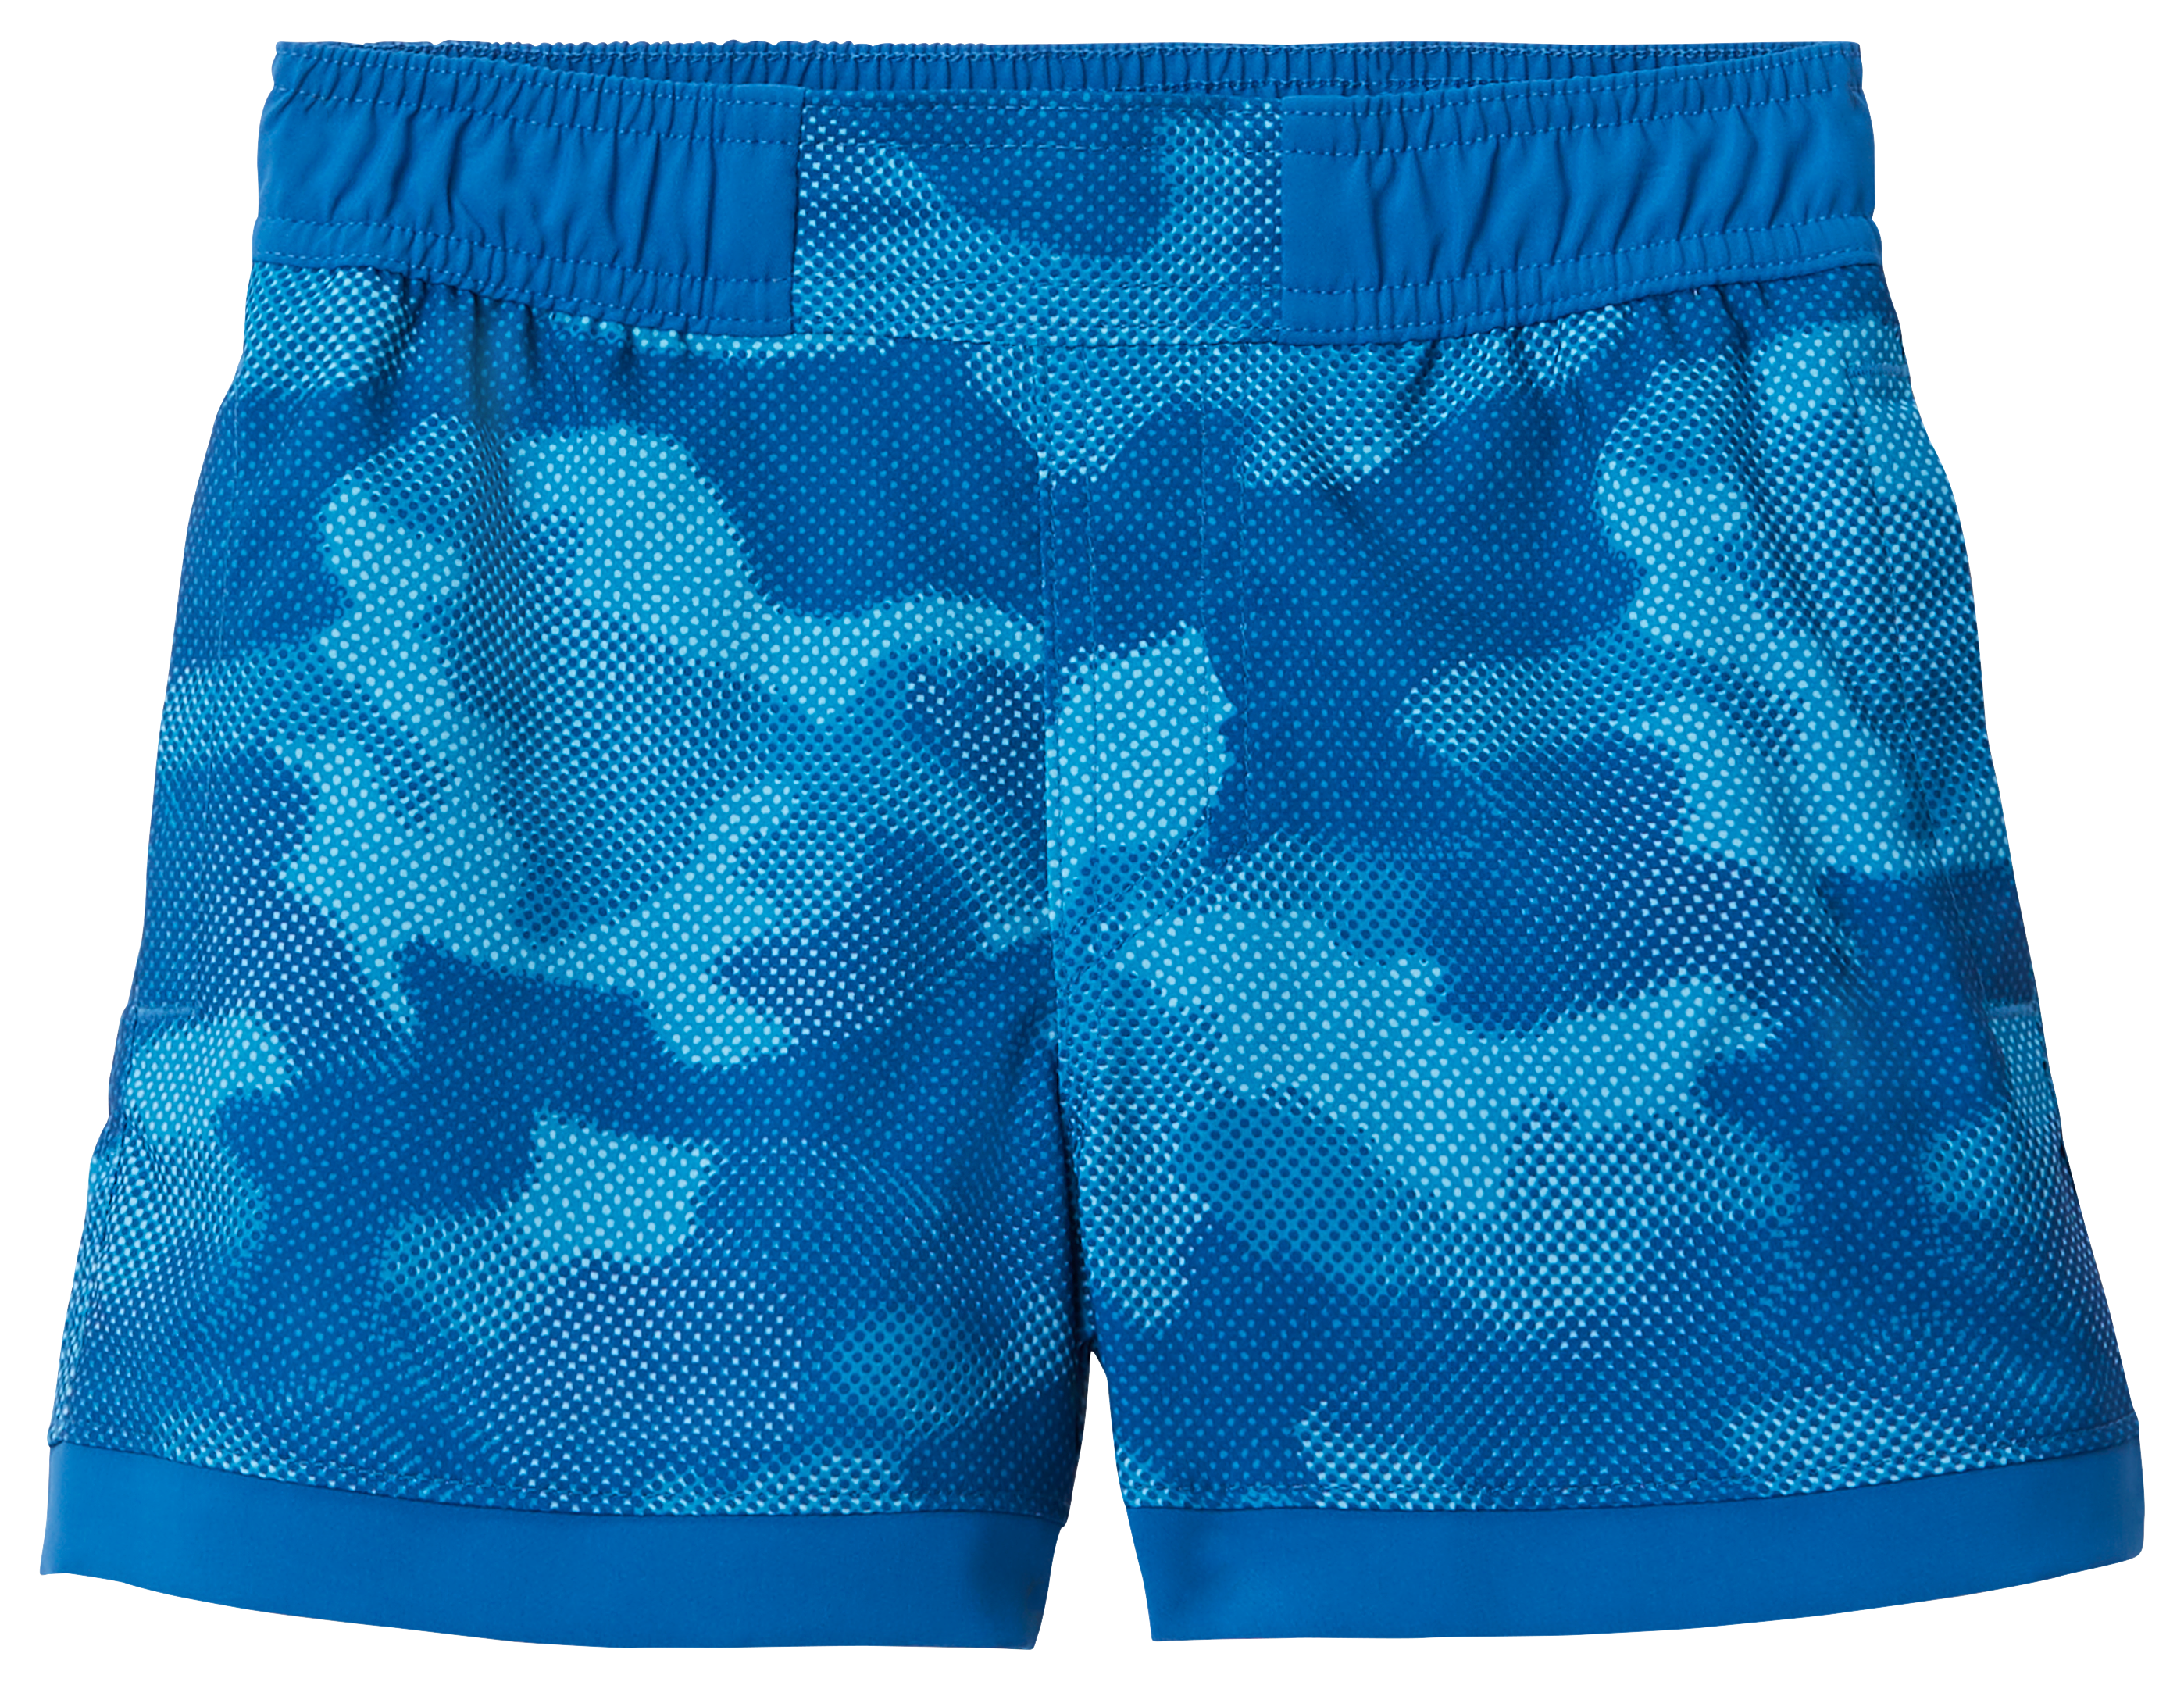 Columbia Shorts Spotted or Camo Bass Board Boys | Pro Toddlers for Sandy Shops Shores